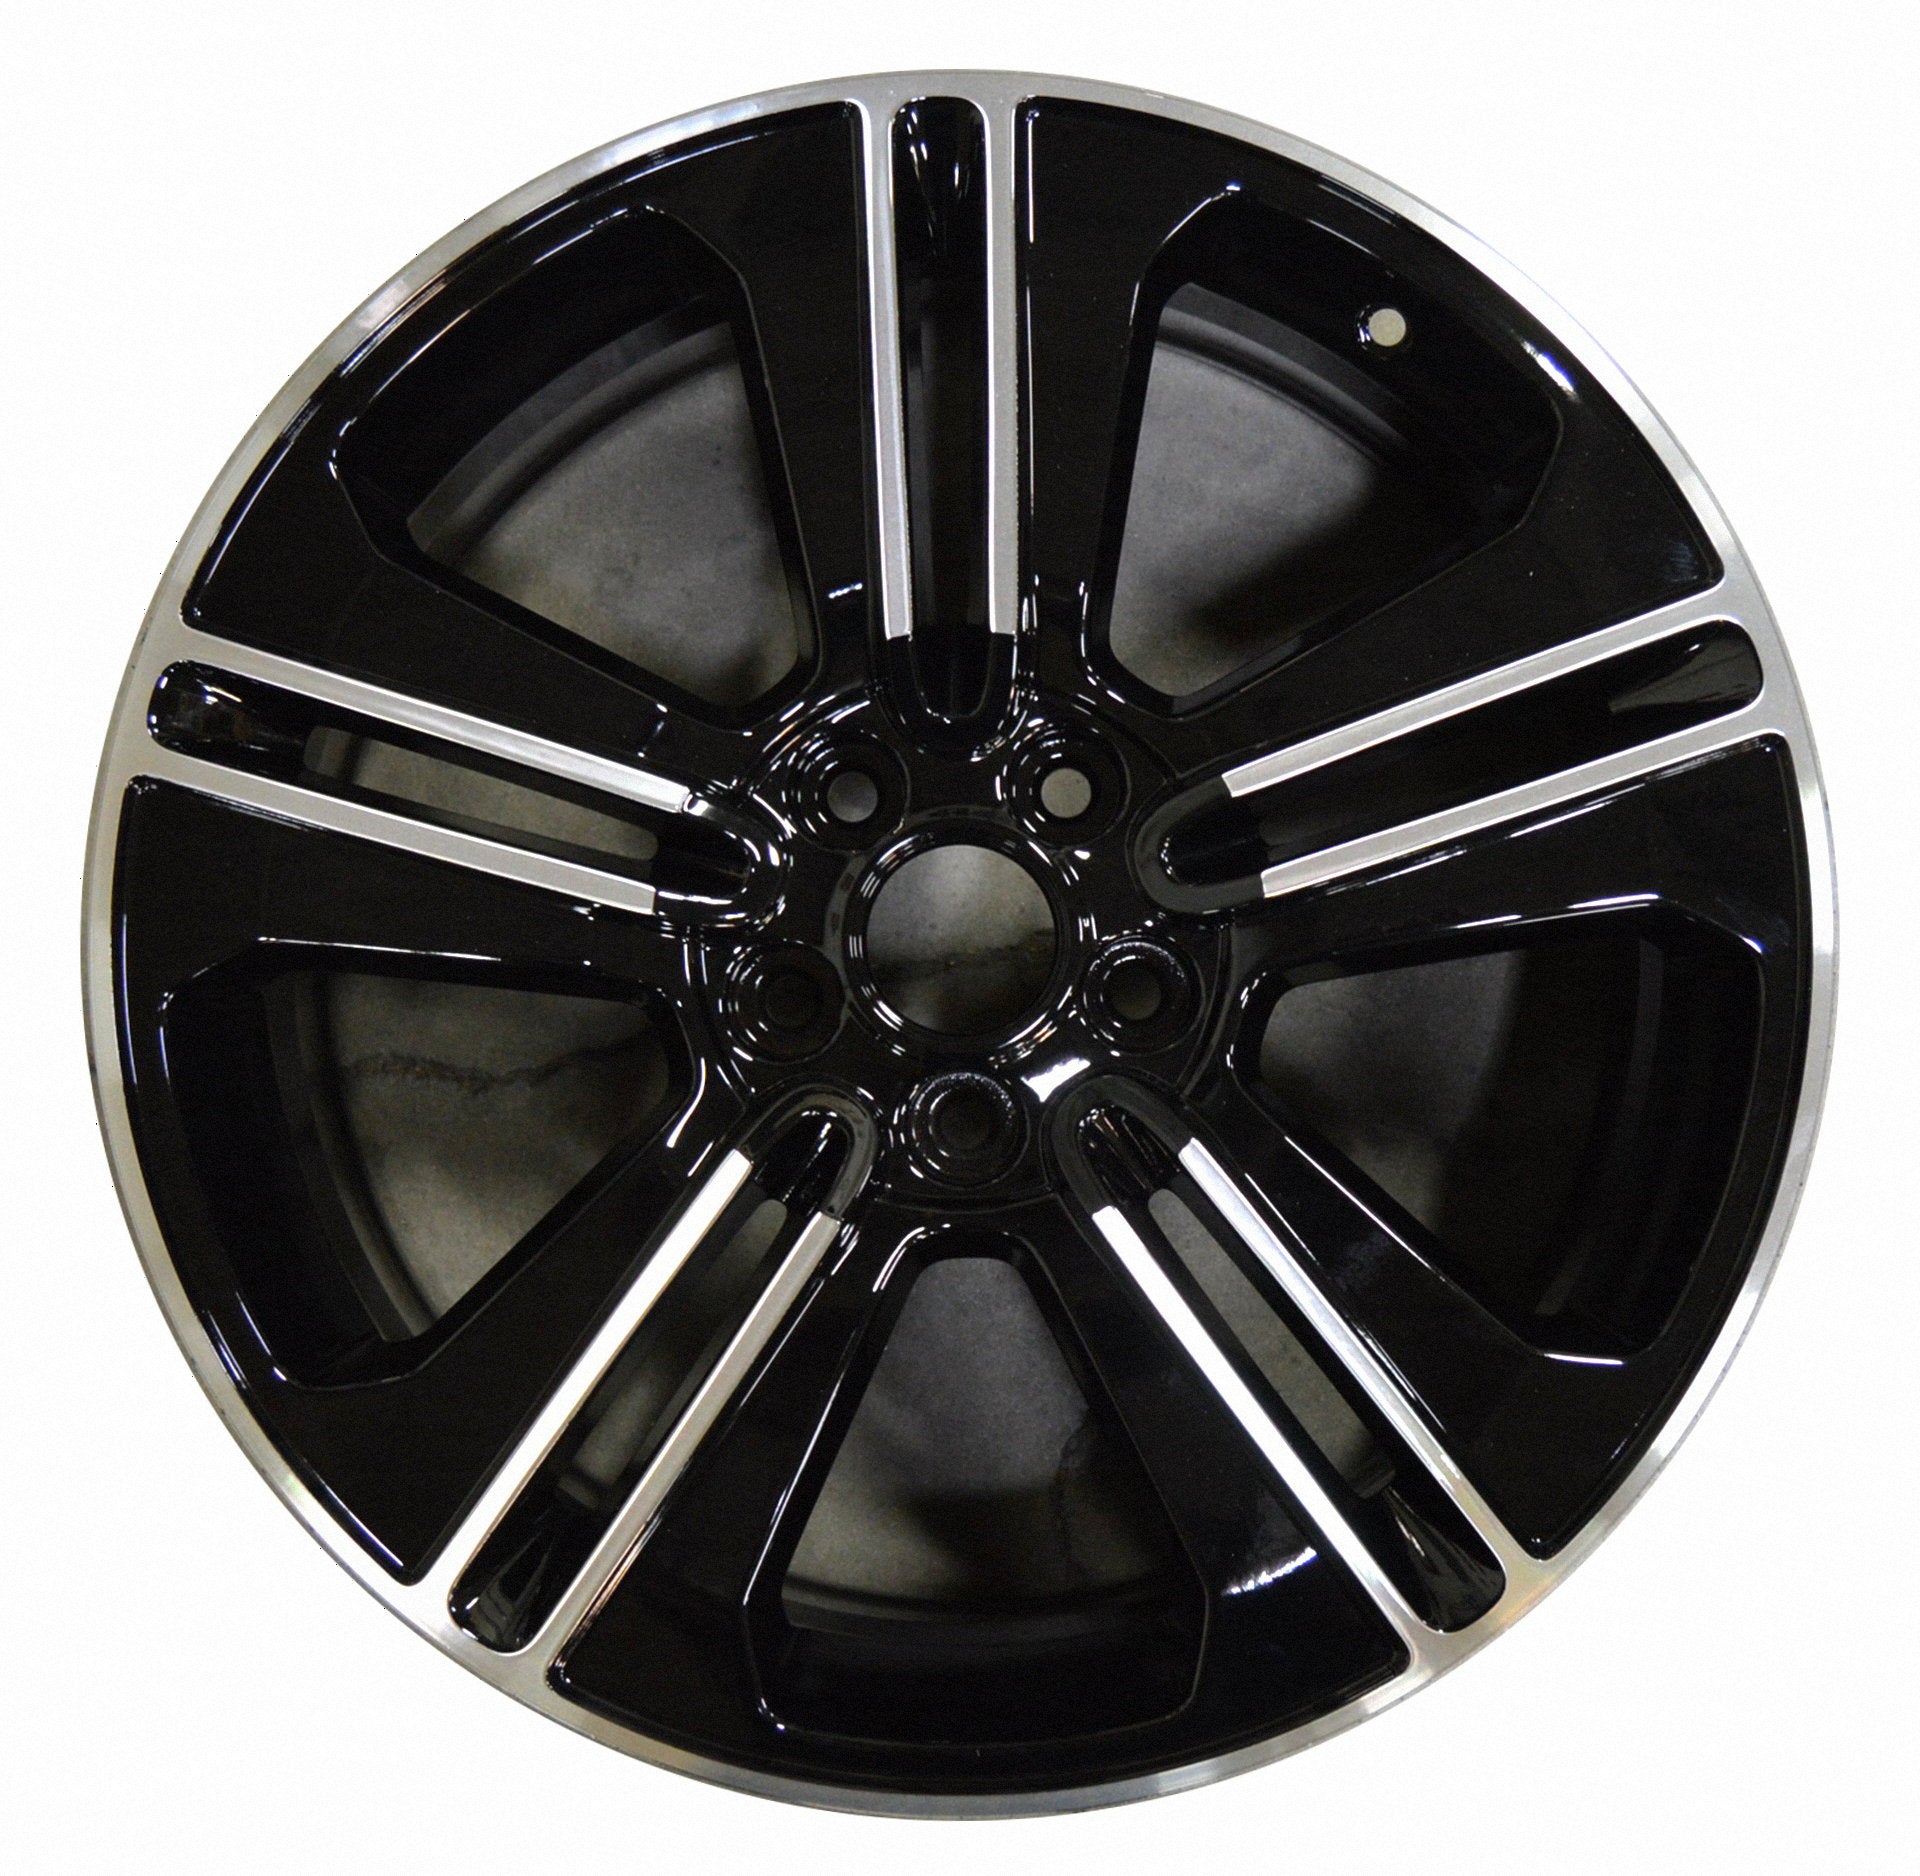 Ford Mustang  2013, 2014 Factory OEM Car Wheel Size 19x8.5 Alloy WAO.3908B.PB01.MA